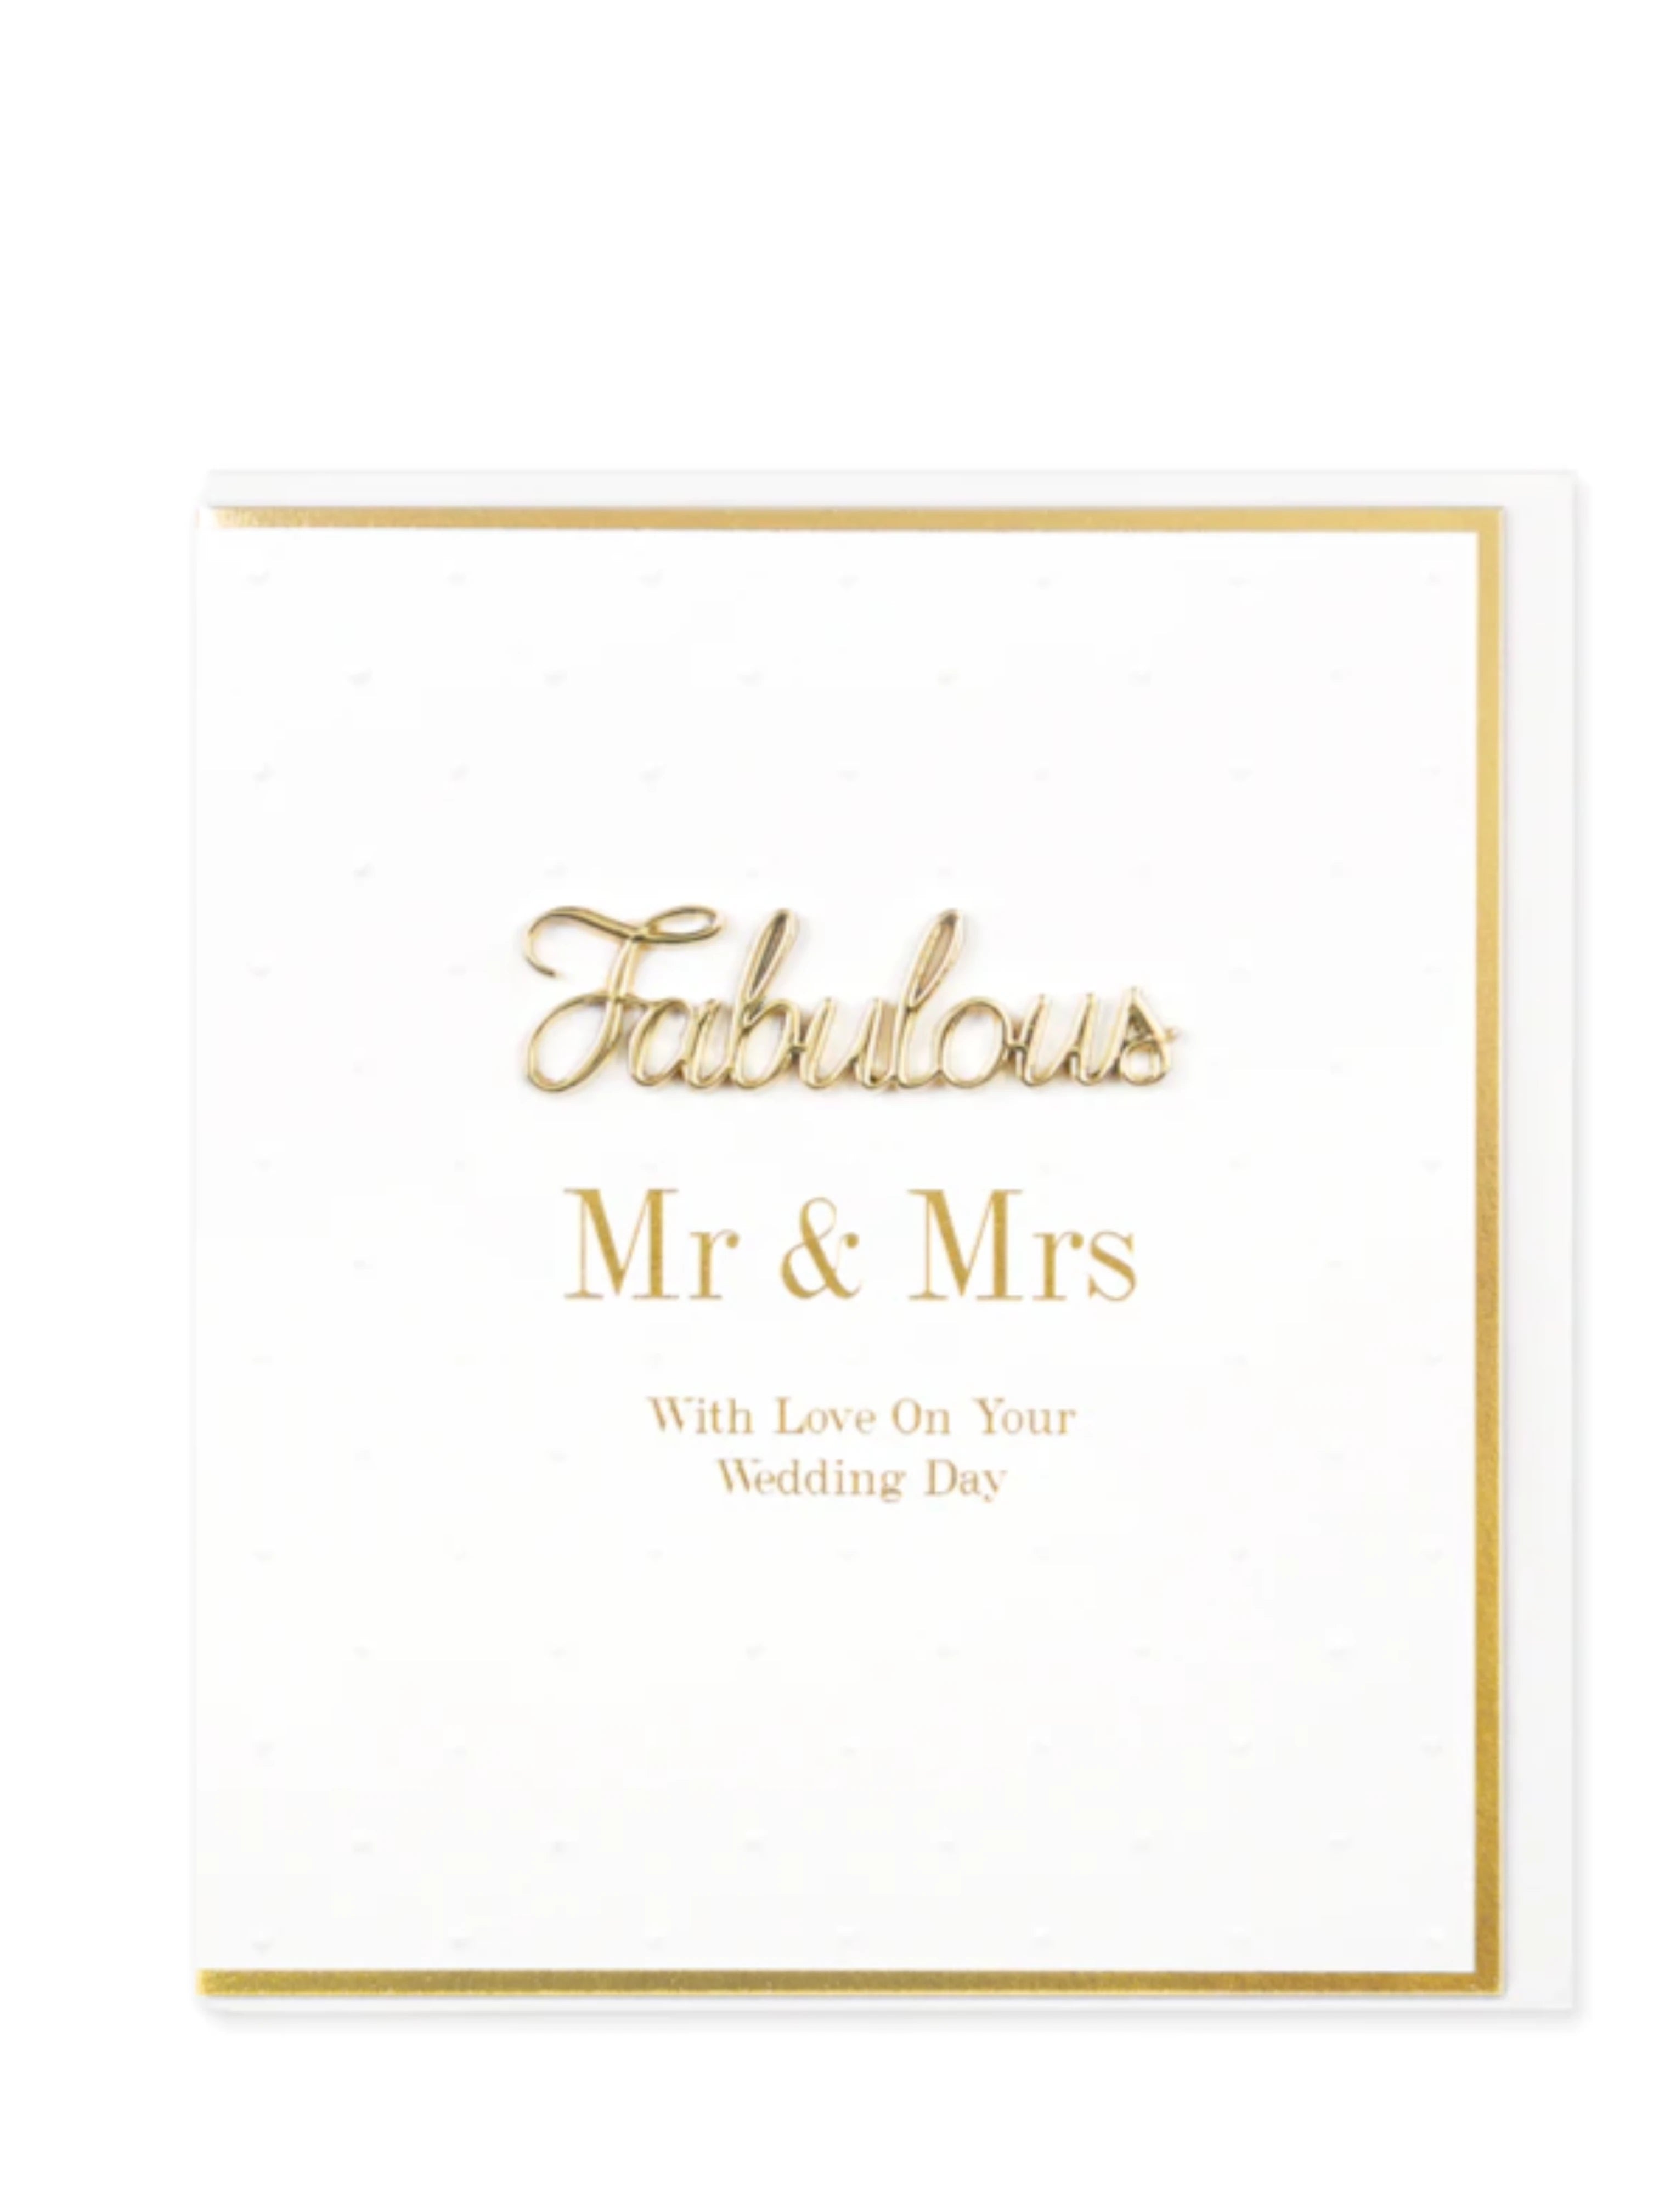 Fabulous Mr and Mrs on your Wedding Day Card